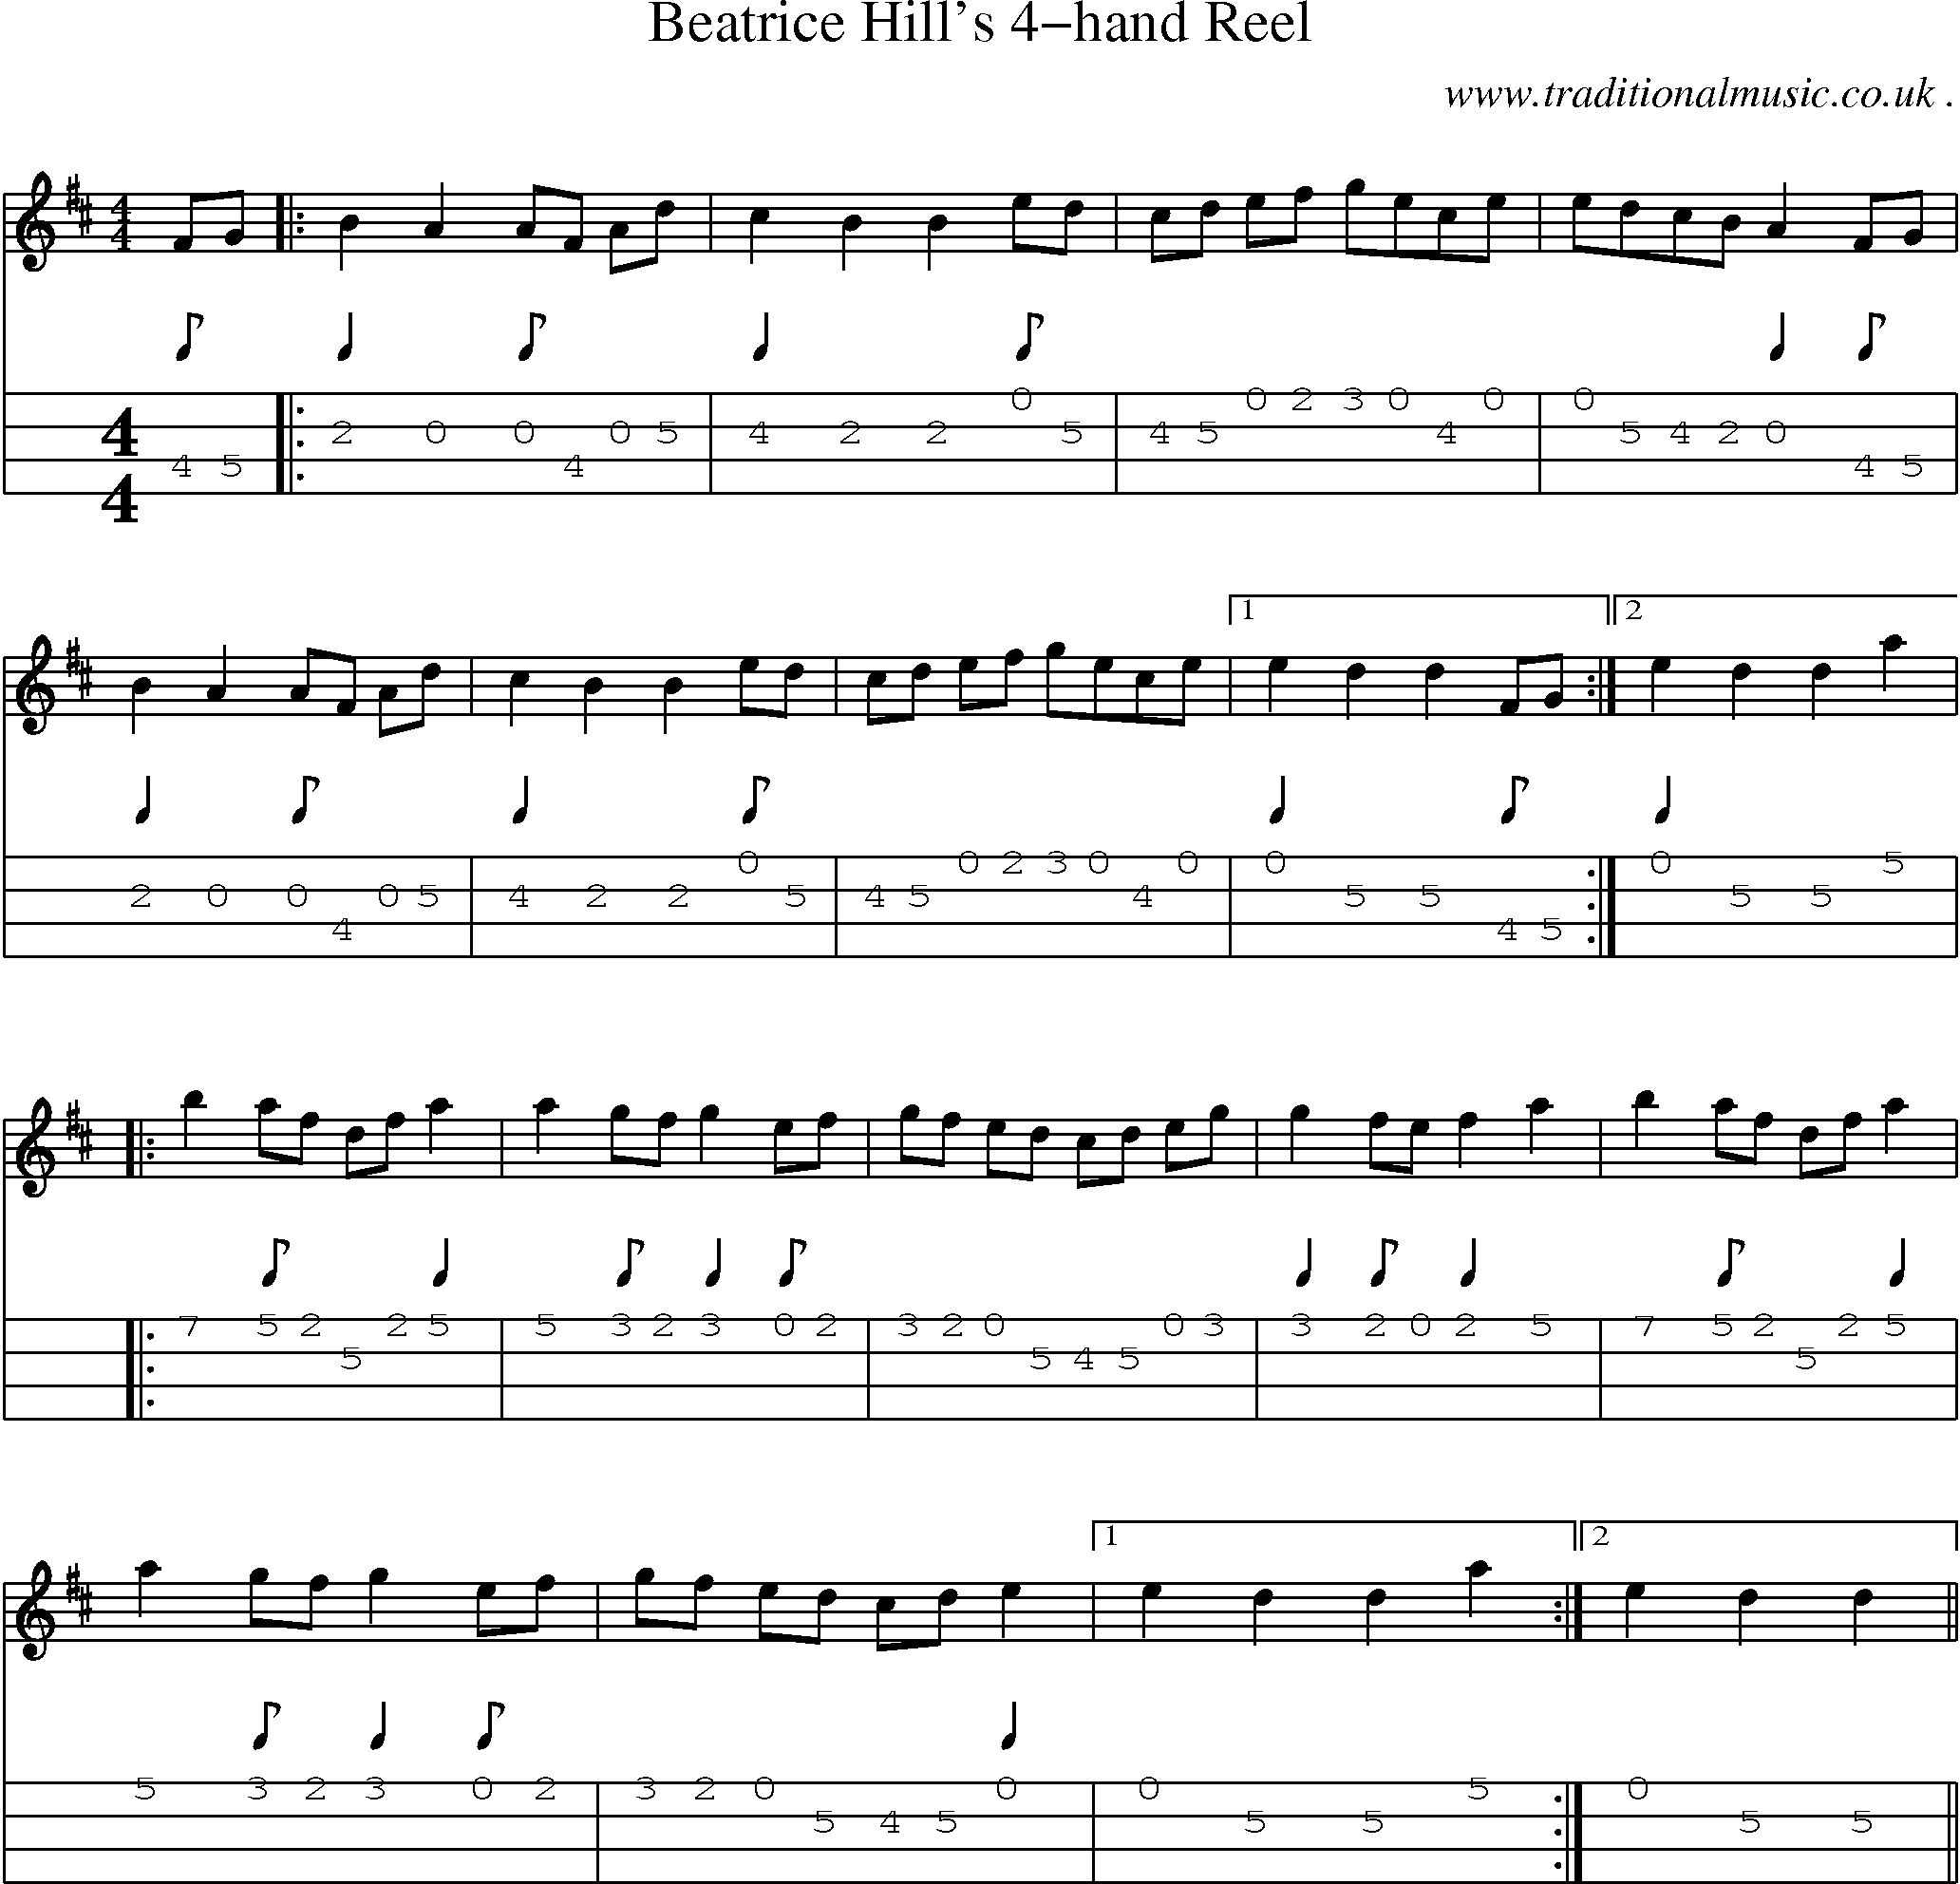 Sheet-Music and Mandolin Tabs for Beatrice Hills 4-hand Reel